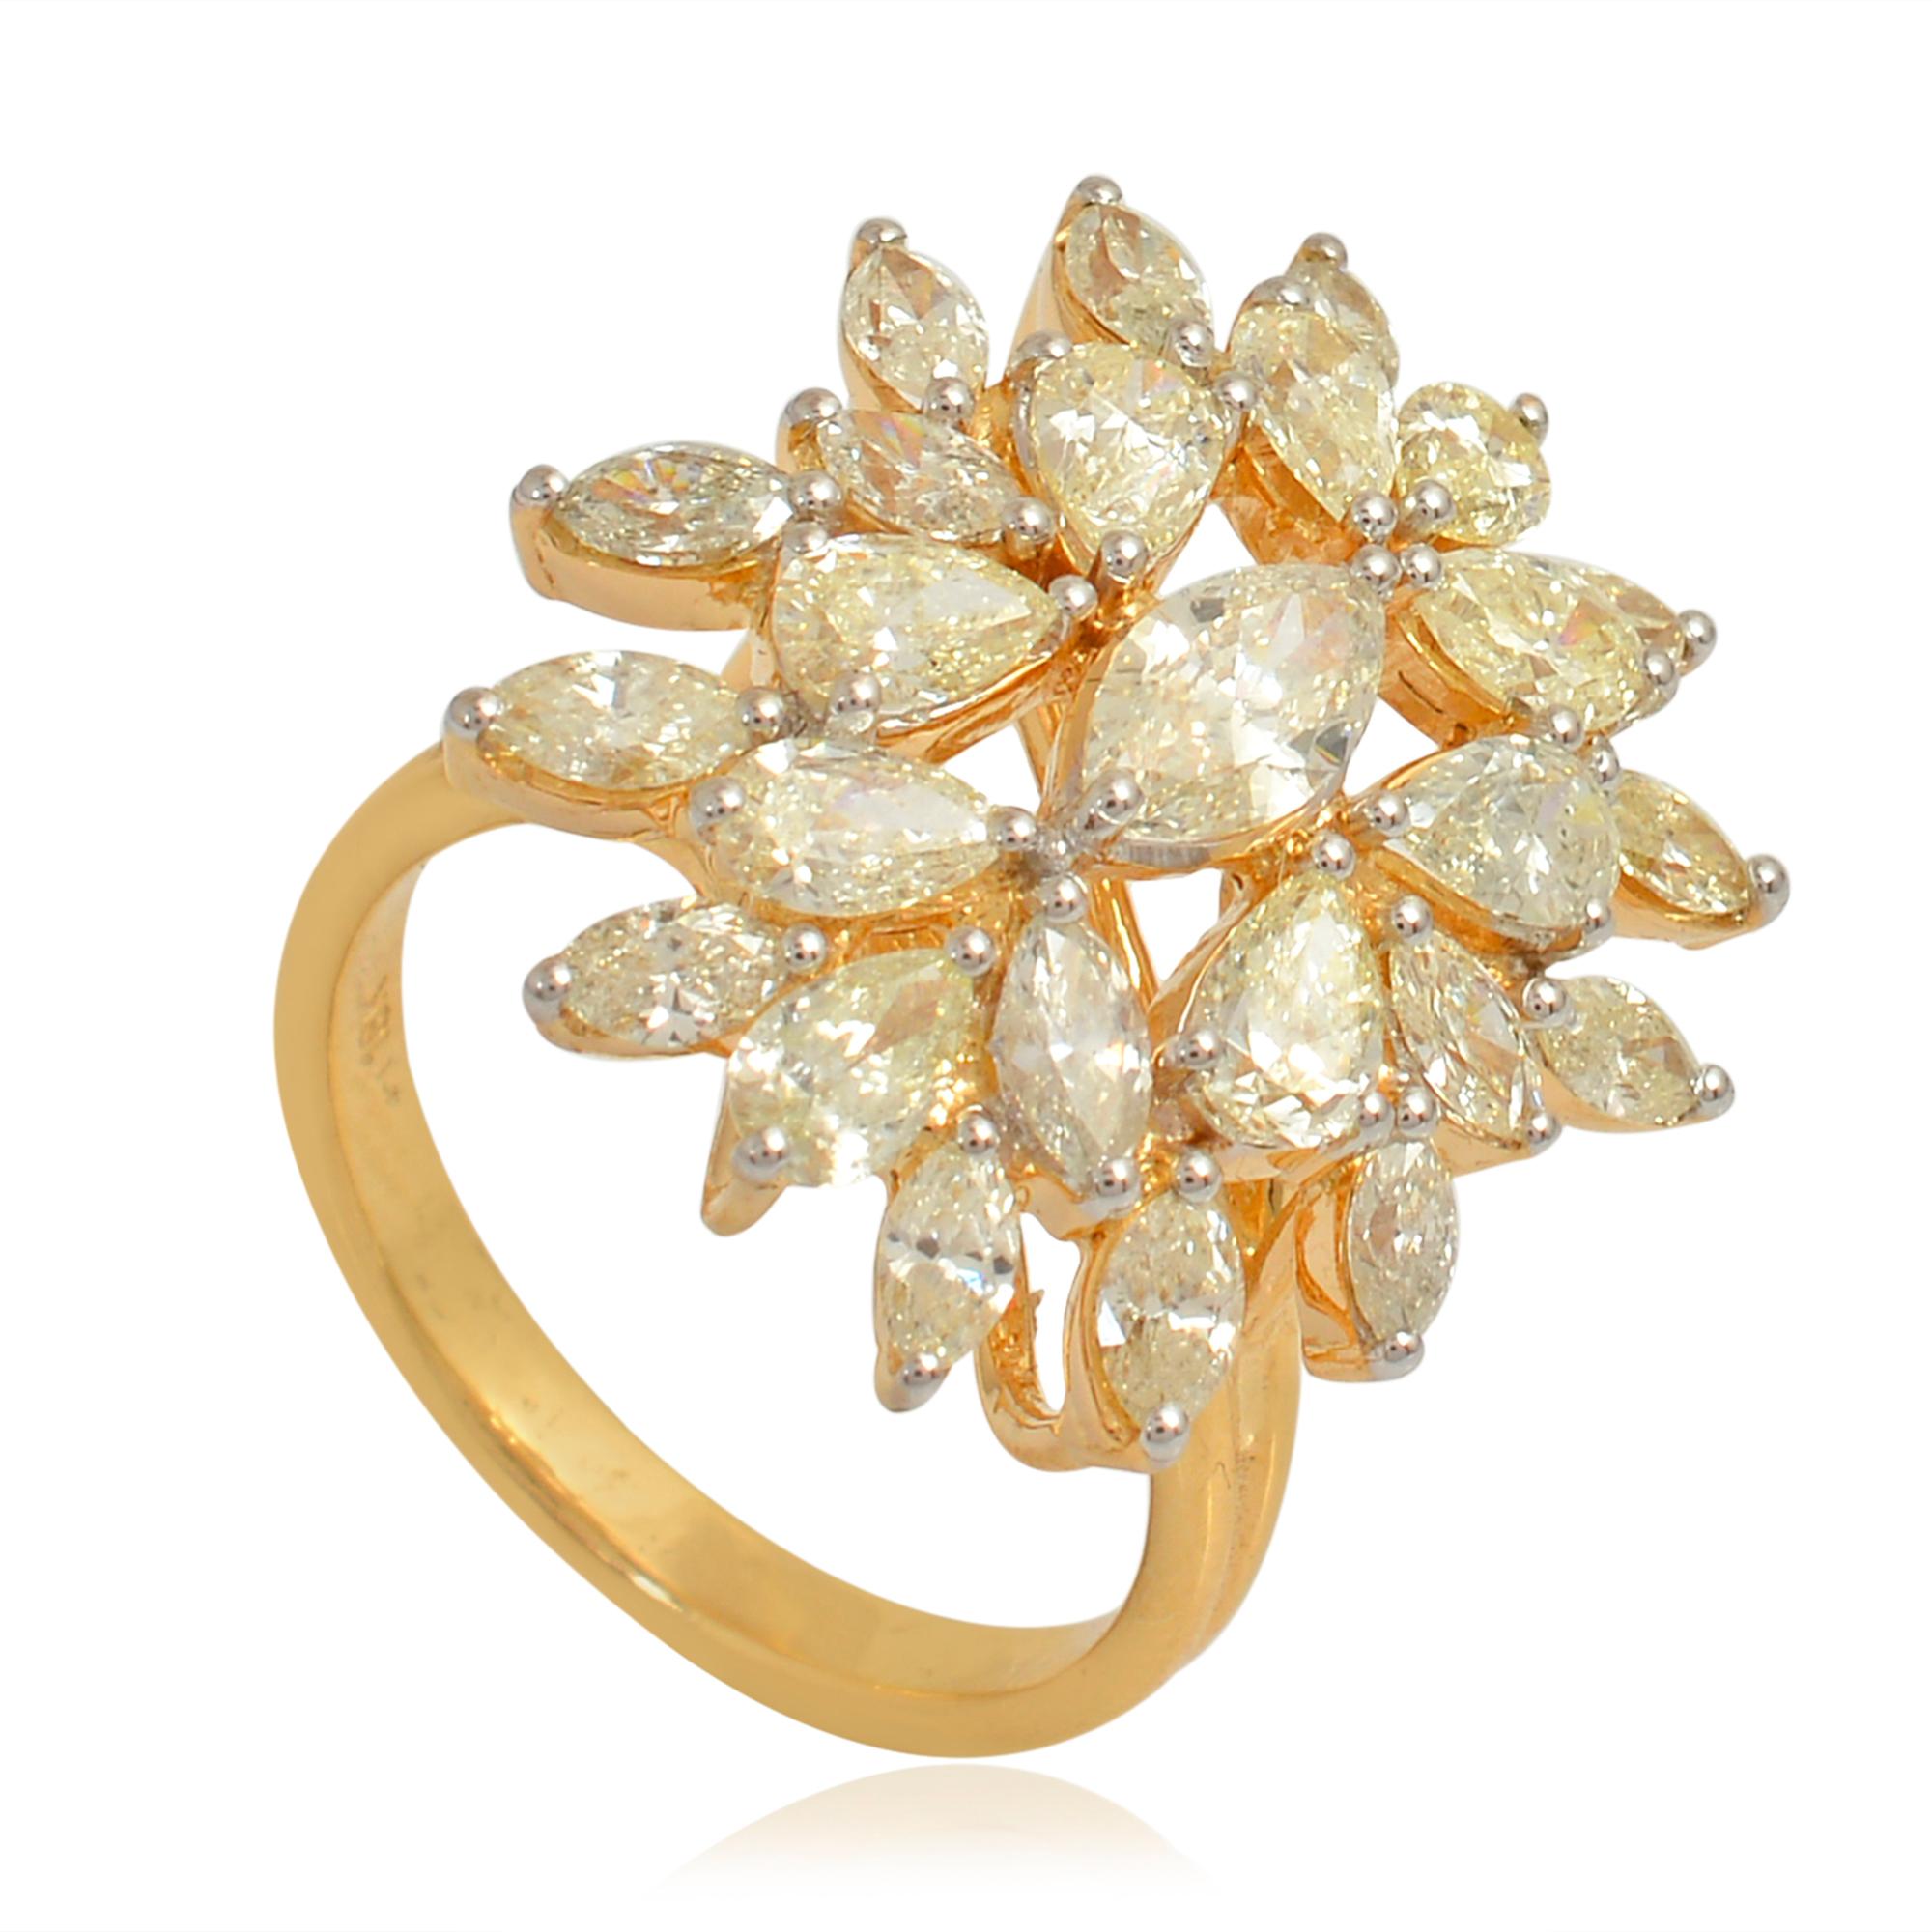 Pear Cut 3.50 Carat Pear & Marquise Diamond Cocktail Ring 18 Karat Yellow Gold Jewelry For Sale